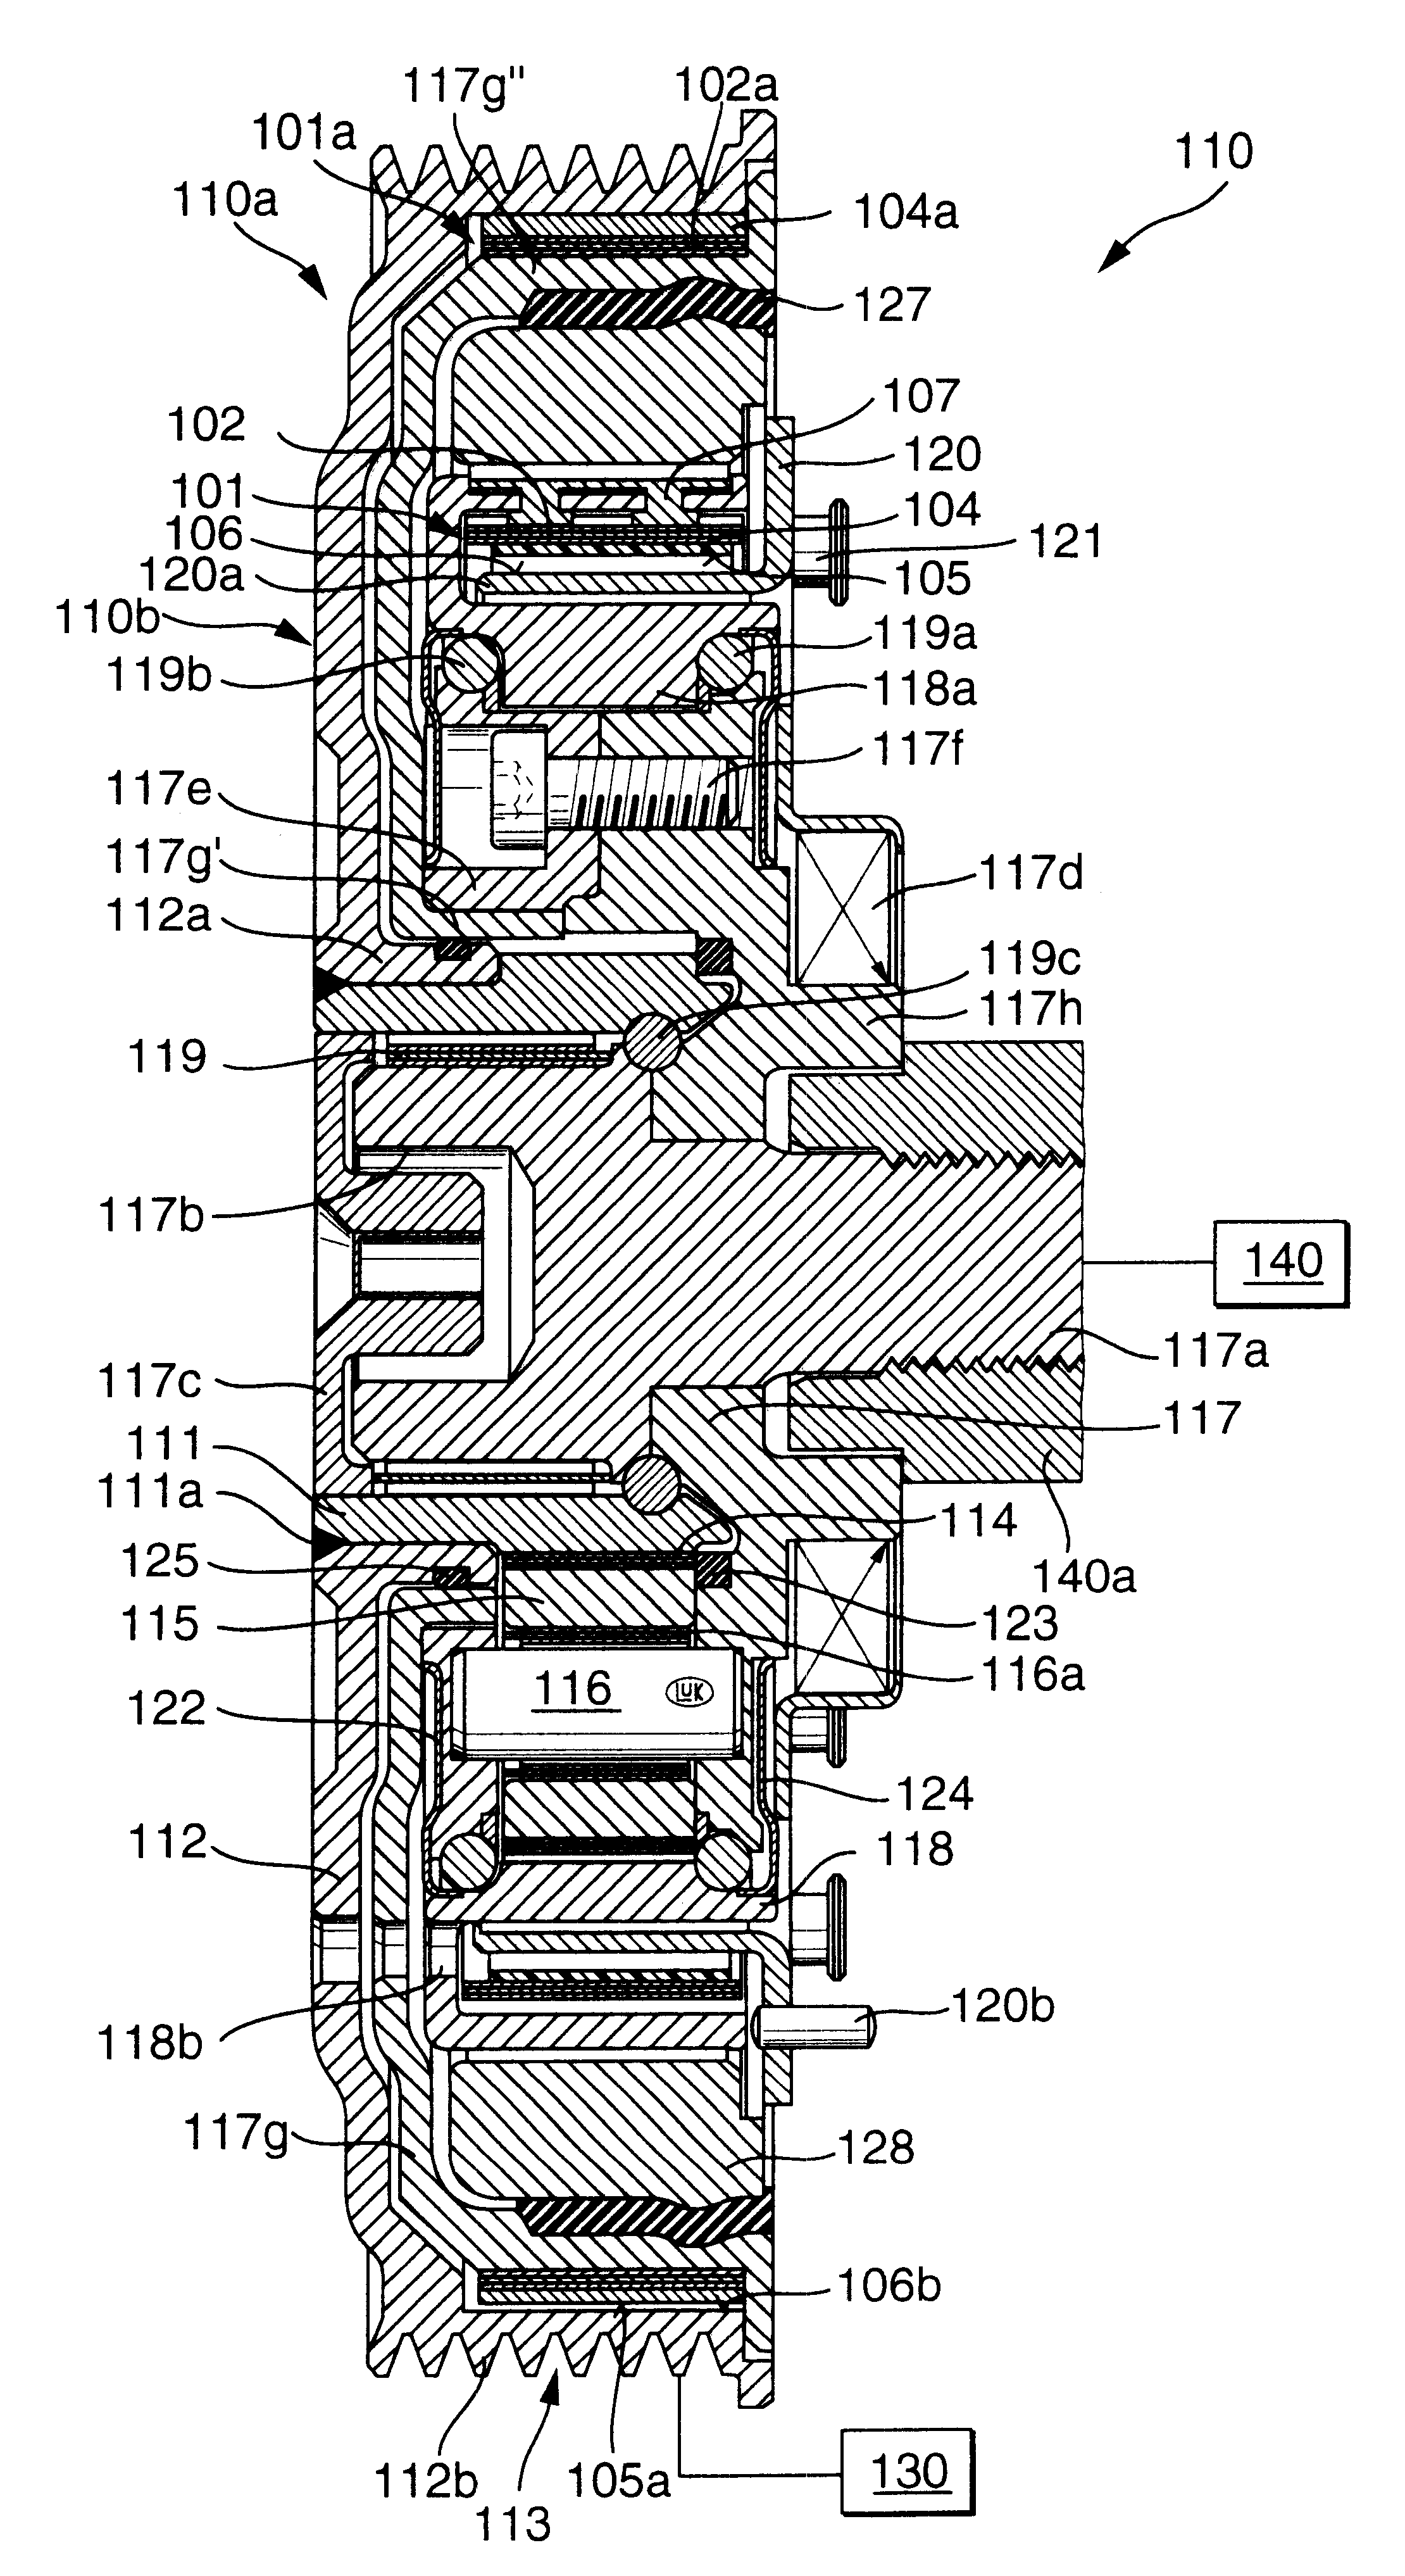 Transmission for use in the power trains of motor vehicles